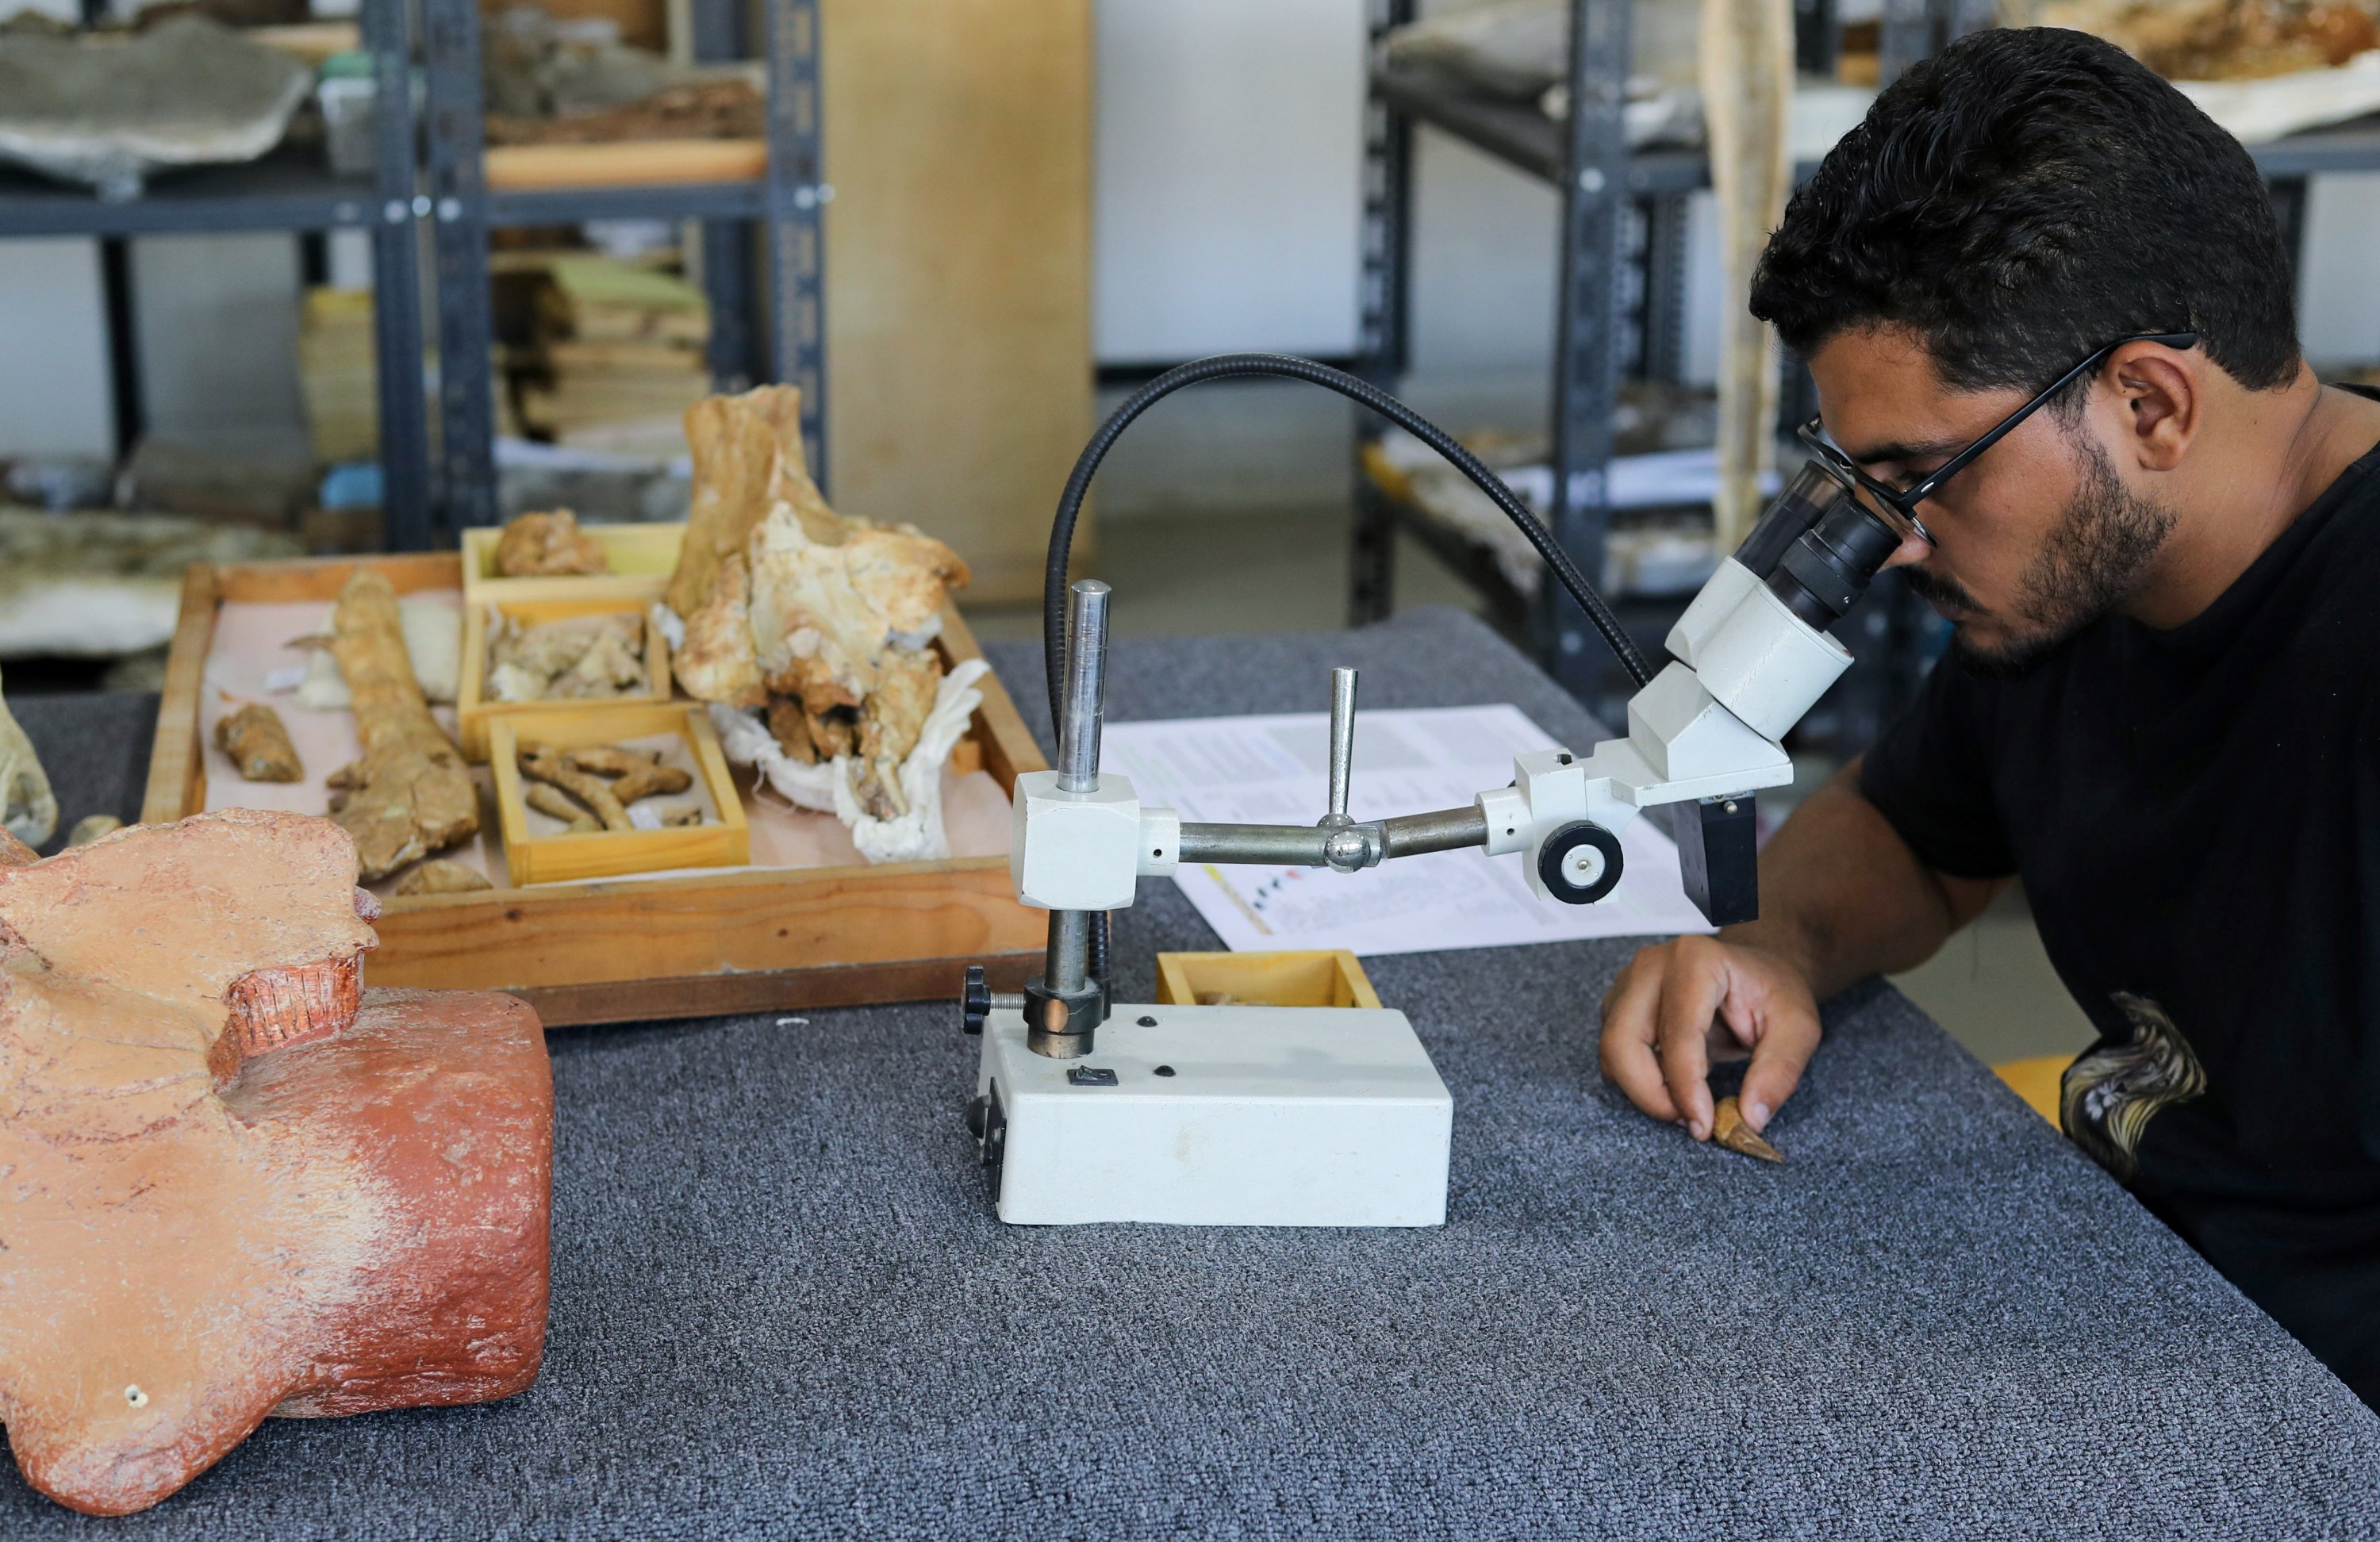 Abdullah Gohar, a researcher at El Mansoura, university works on renovating the 43 million-year-old fossil of a previously unknown four-legged amphibious whale called "Phiomicetus Anubis", that helps trace the transition of whales from land to sea, which were discovered in the Fayum Depression in the Western Desert of Egypt, near the town of El Mansoura, north of Cairo, Egypt August 26, 2021. (Reuters Photo) 